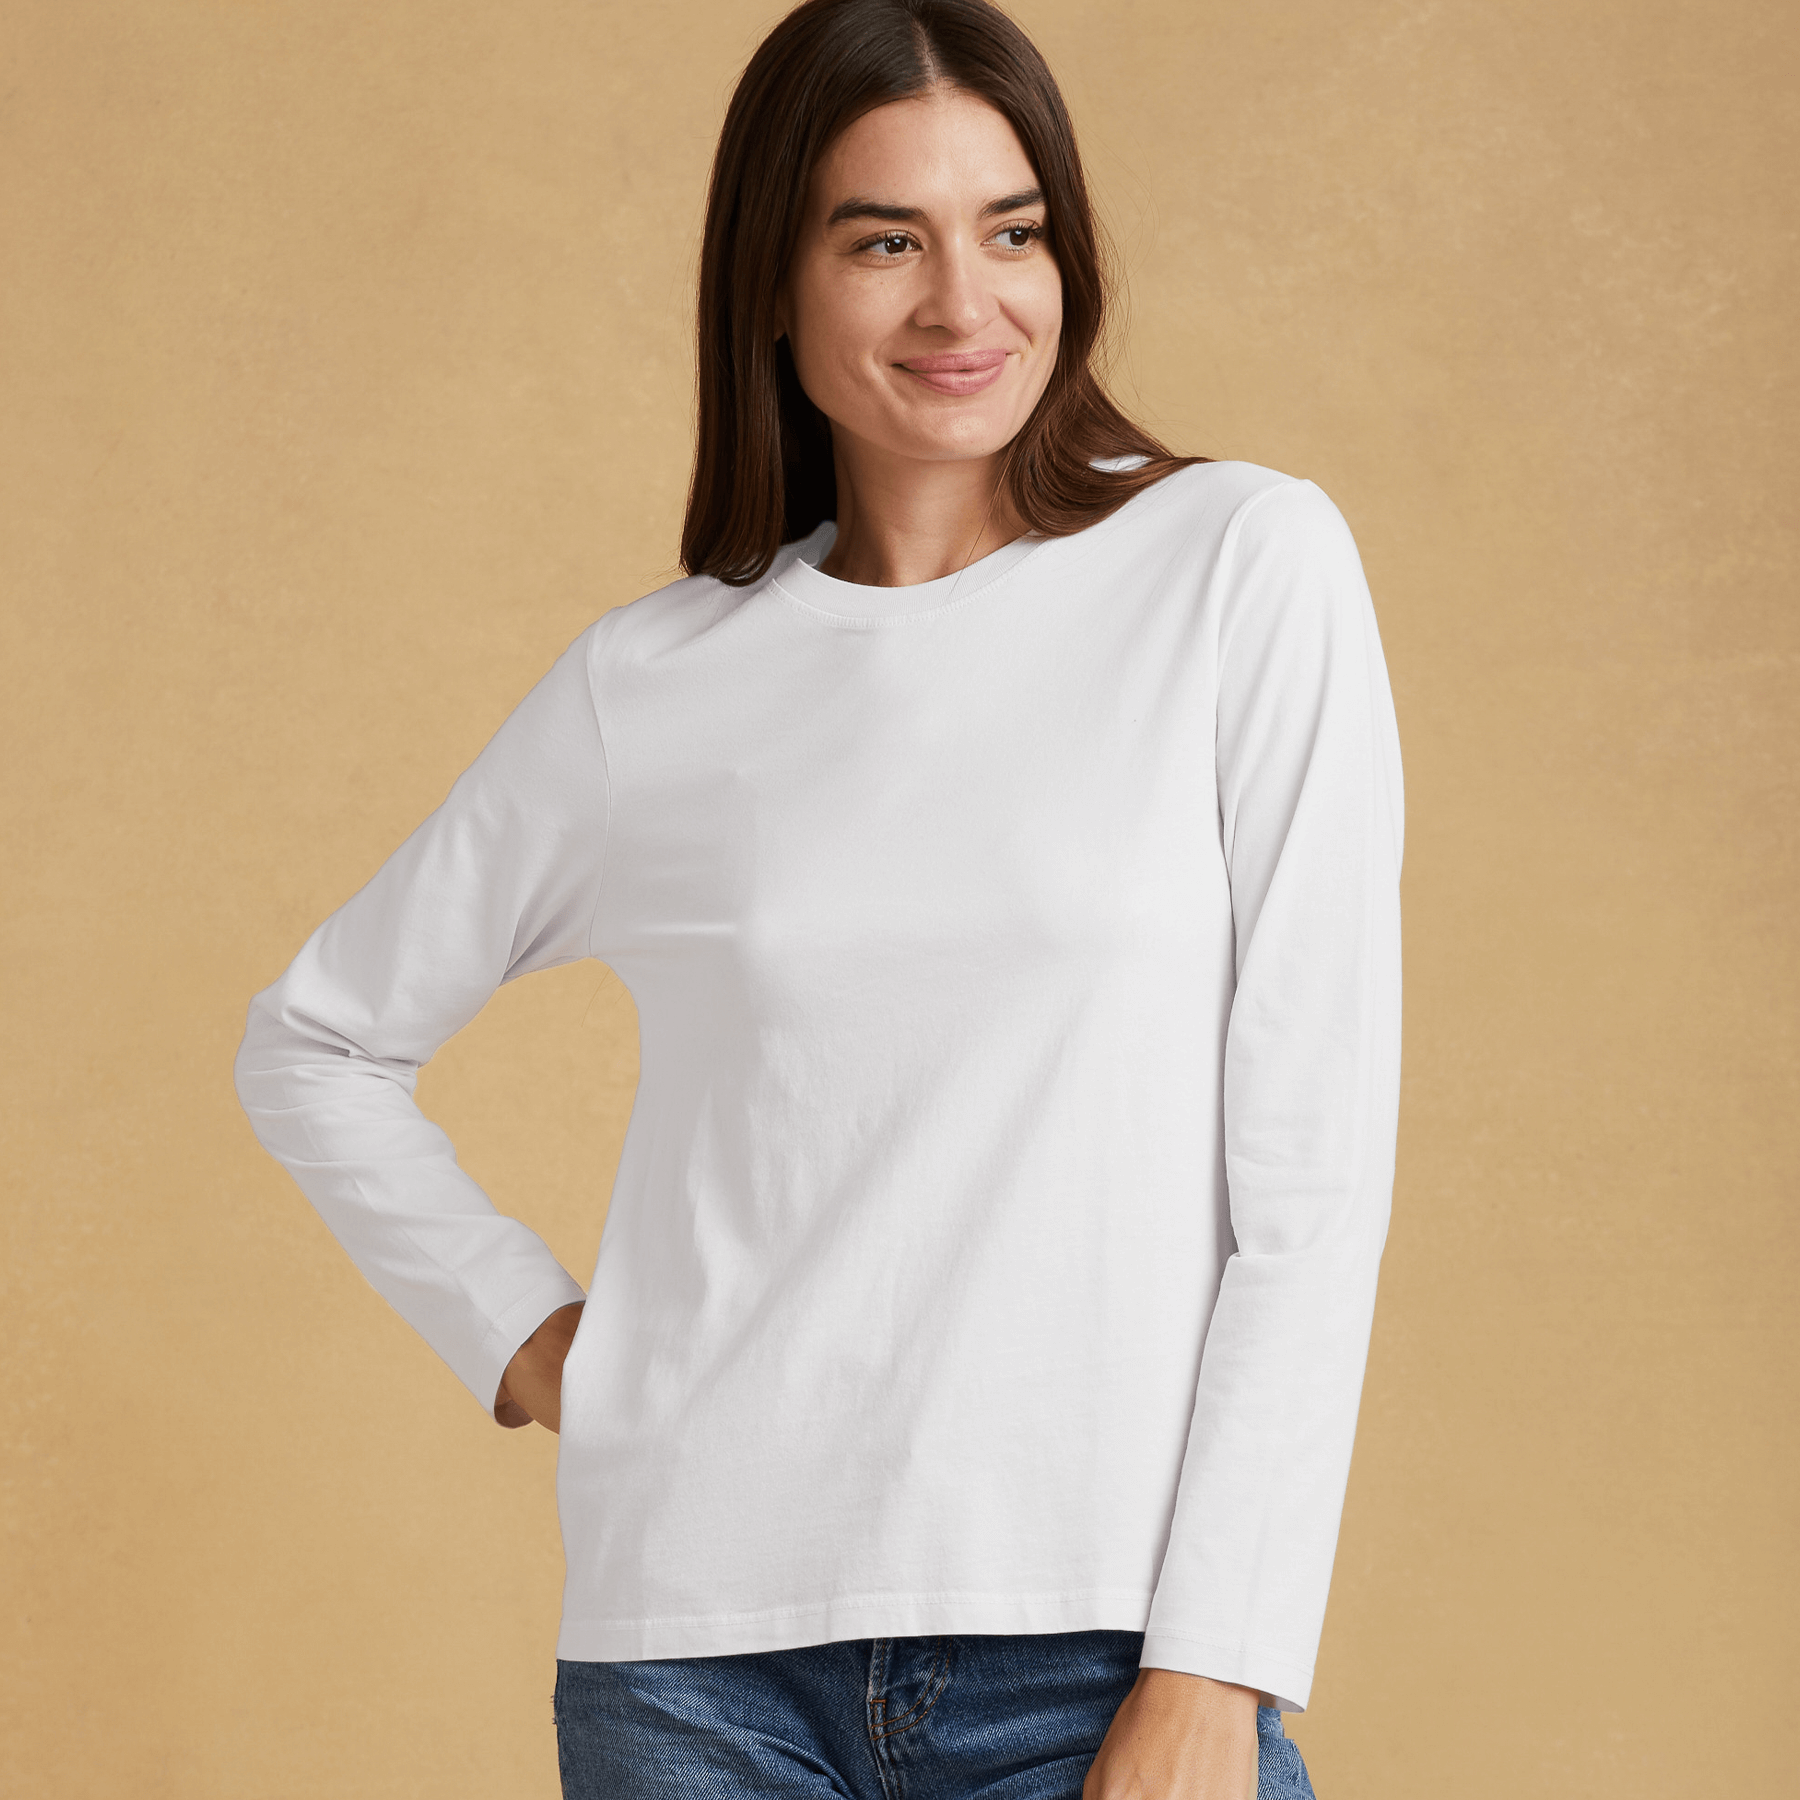 Essentials Women's Classic-Fit Long-Sleeve Crewneck T-Shirt  (Available in Plus Size)